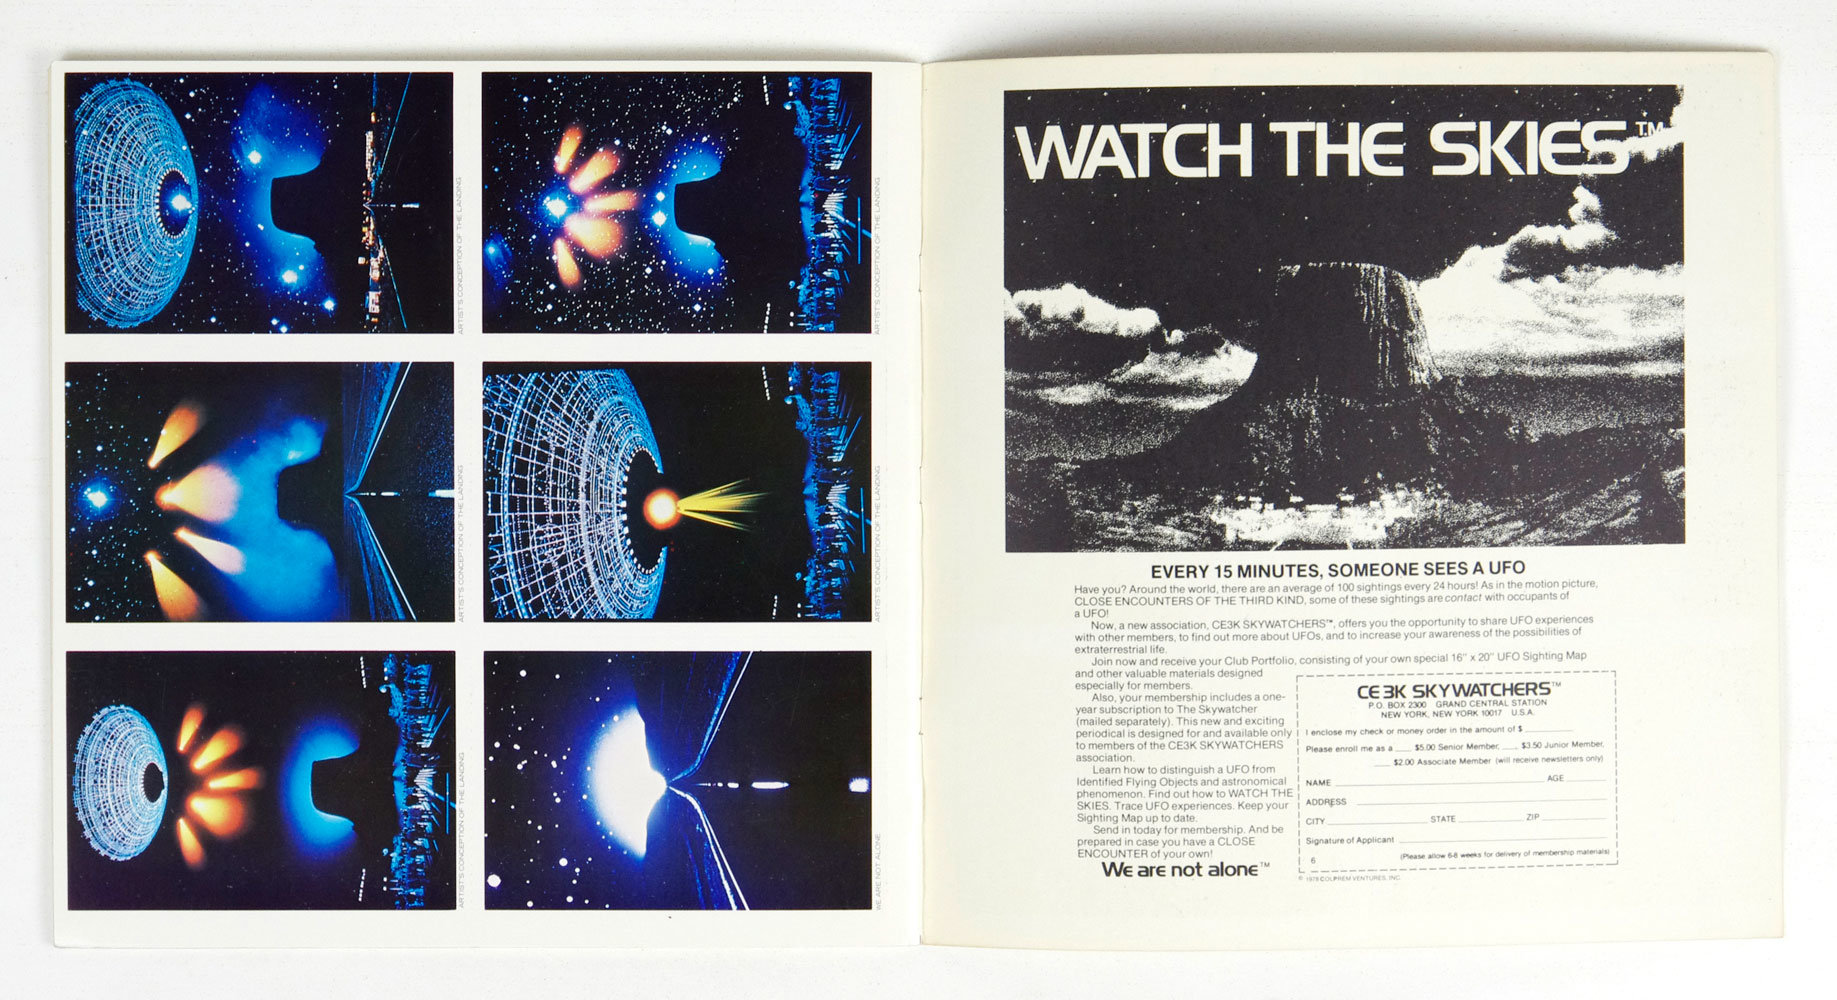 Close Encounters Of The Third Kind Postcard Book 1977